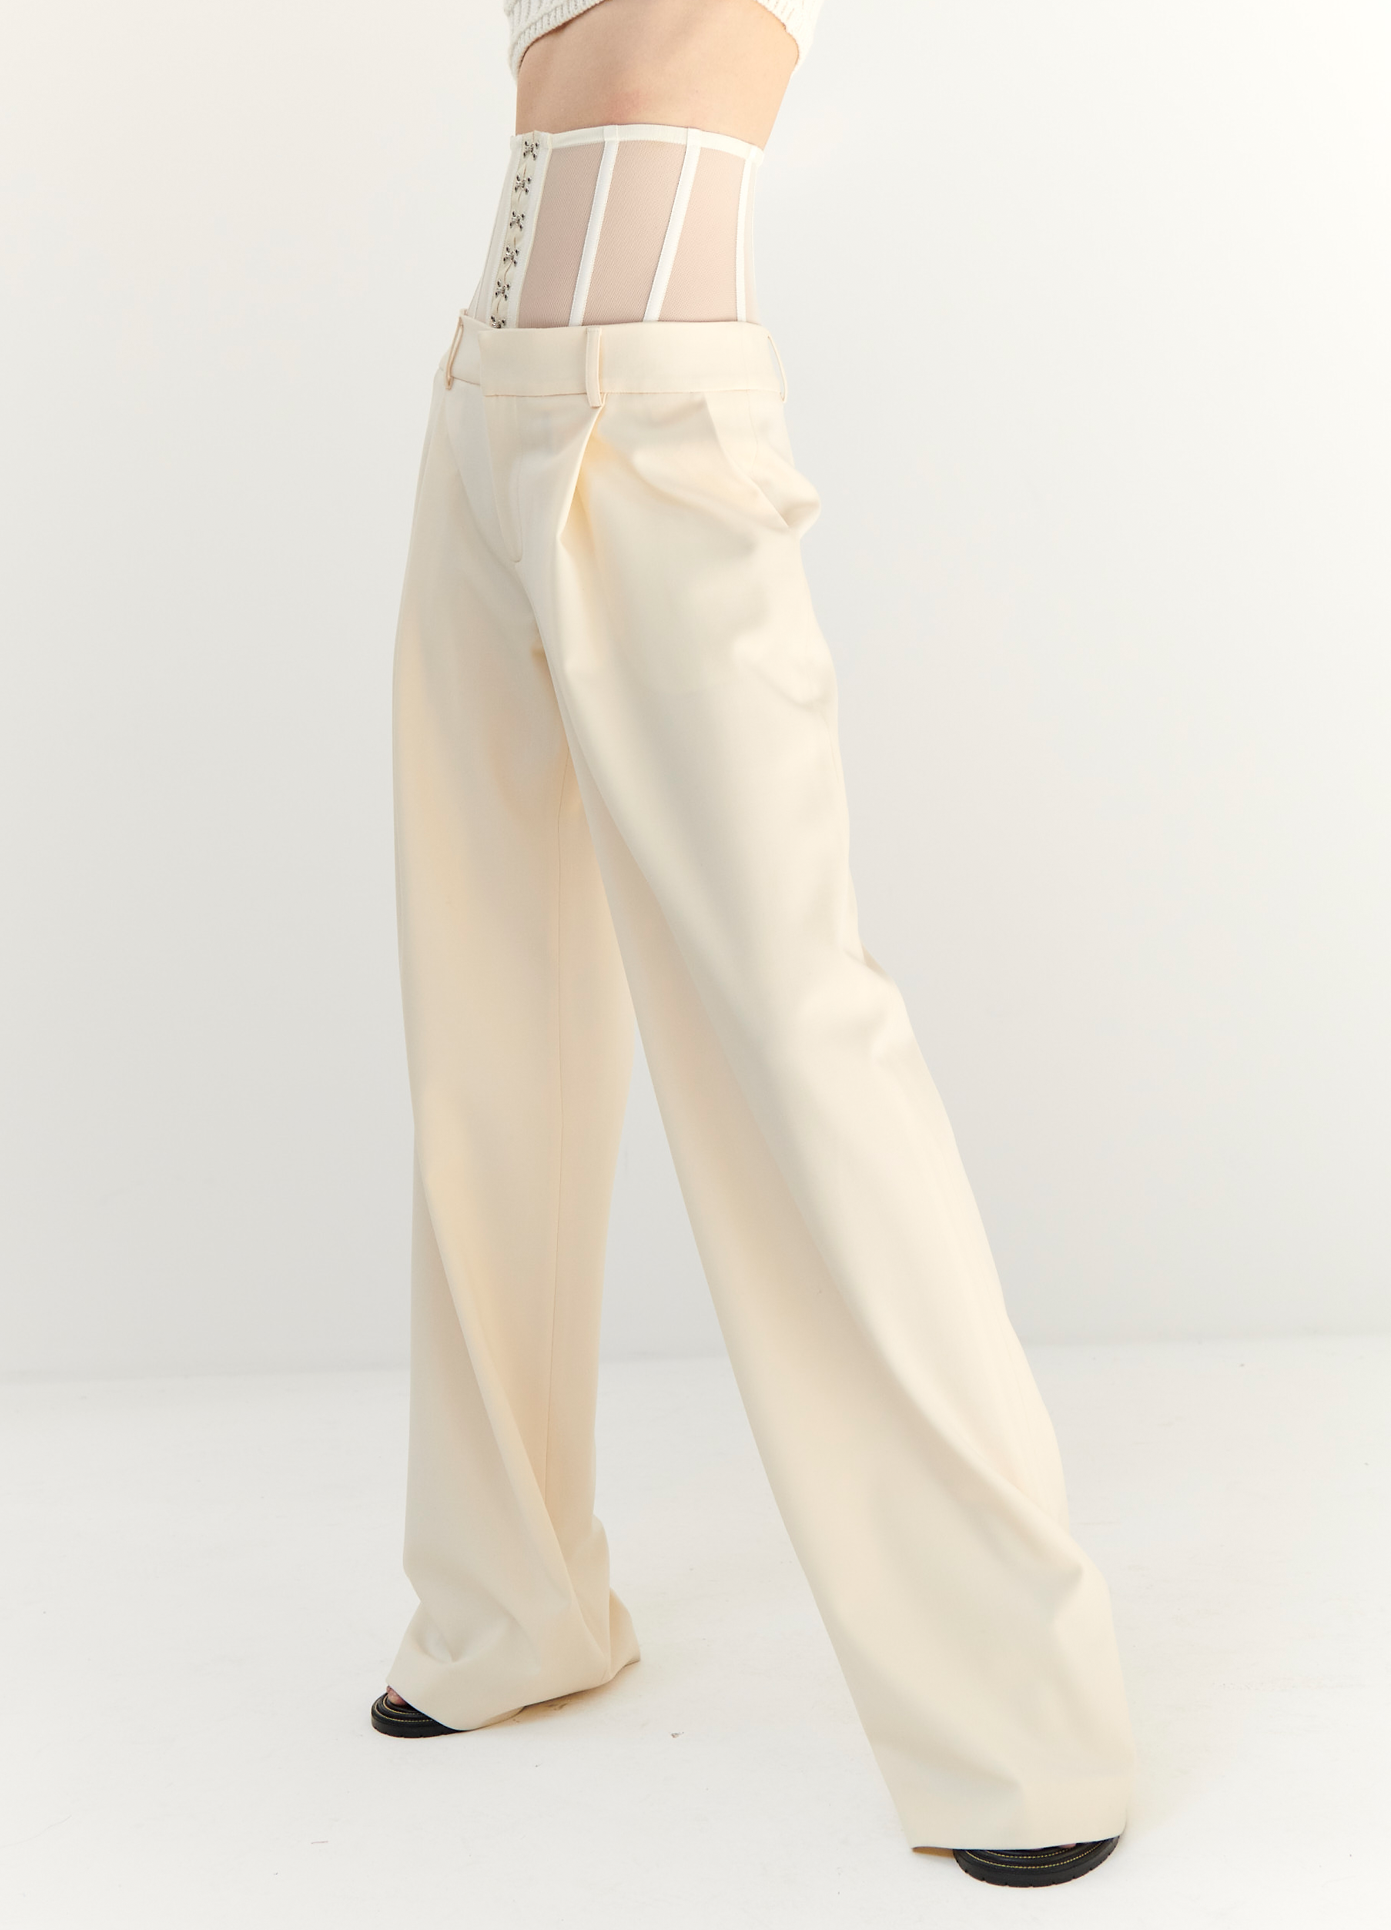 MONSE Mesh Bustier Trousers in Ivory on model front detail view